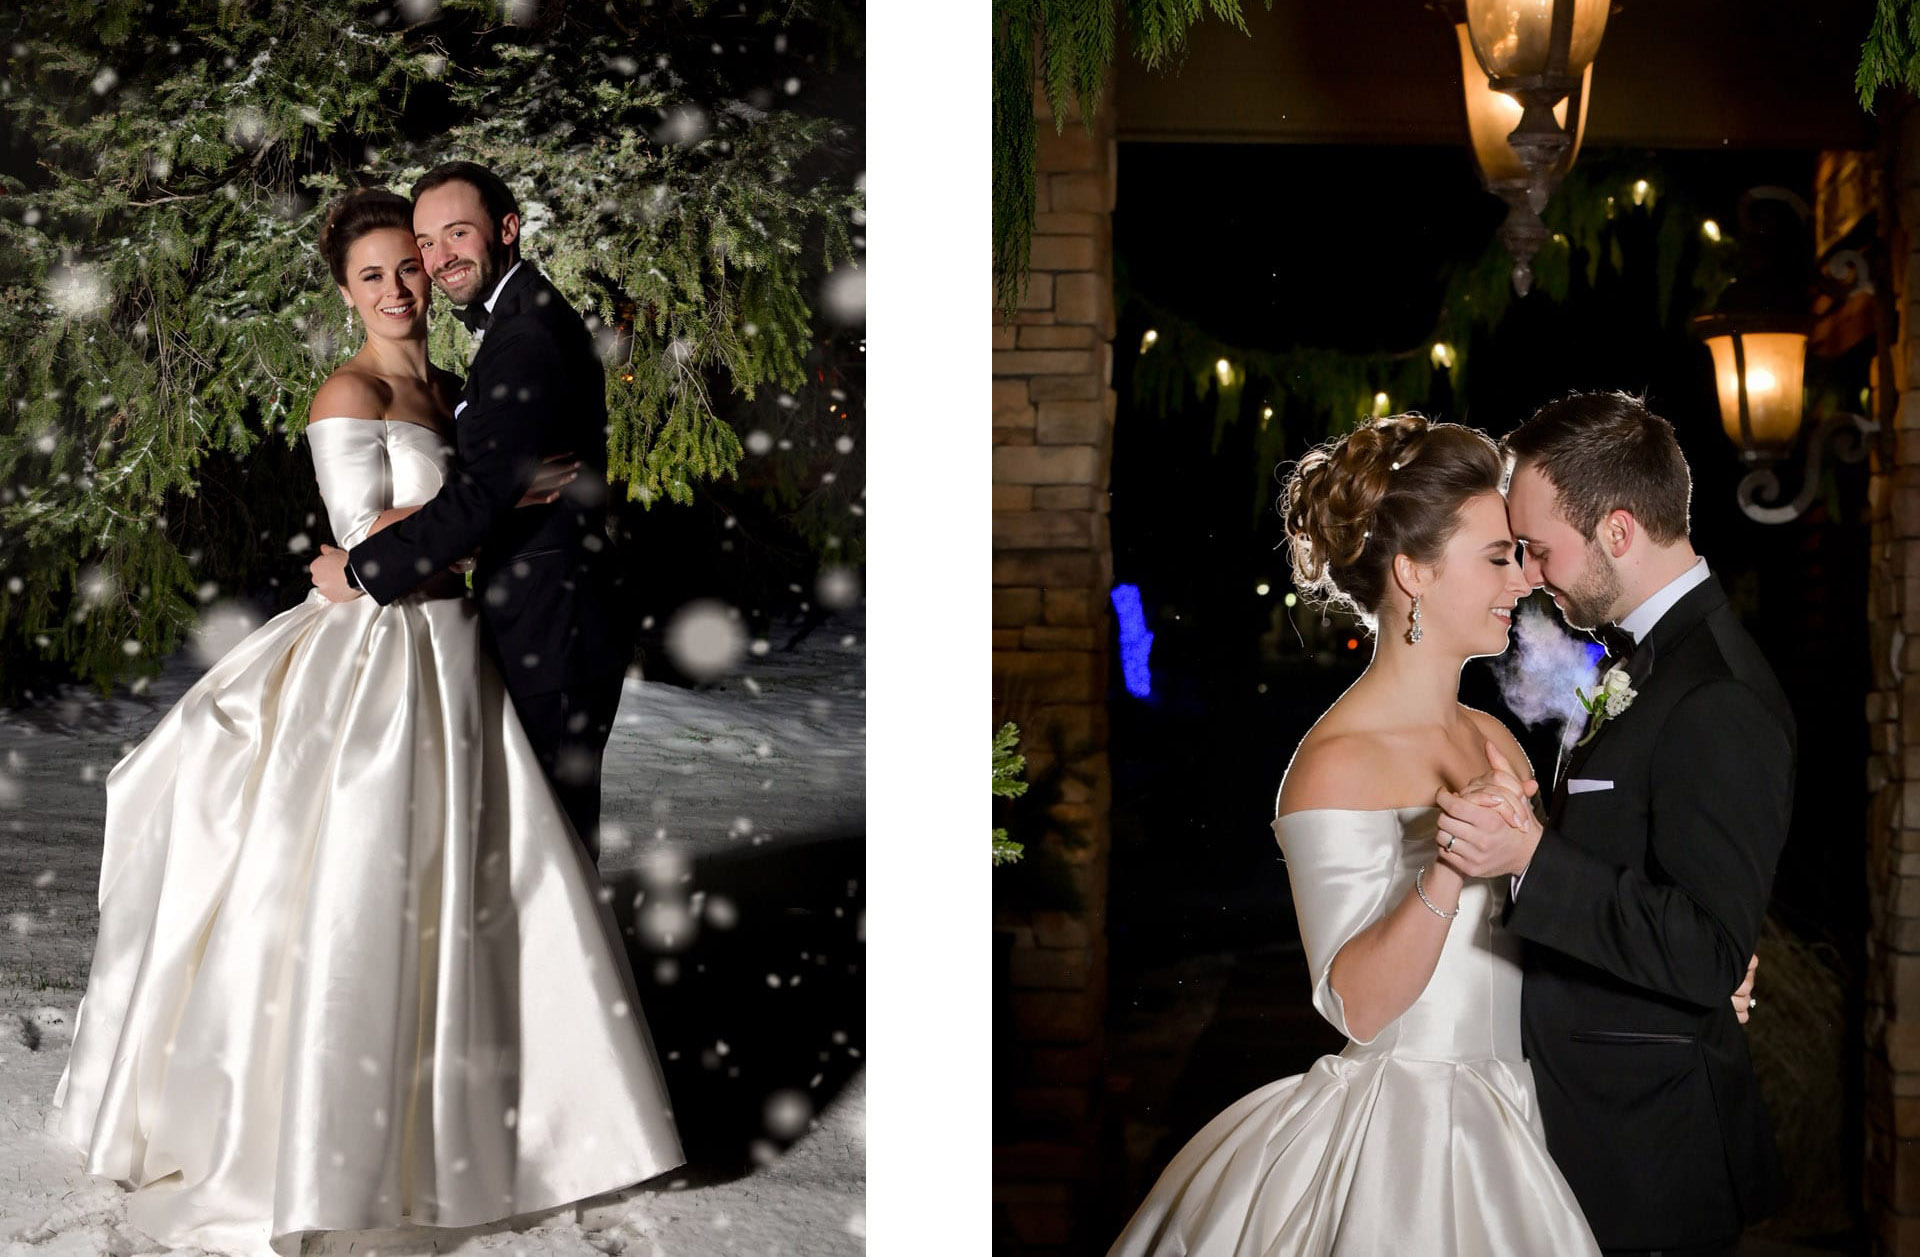 Couple in the snowfall during their winter wedding at the Iroquios Club in Bloomfield Hills, Michigan.